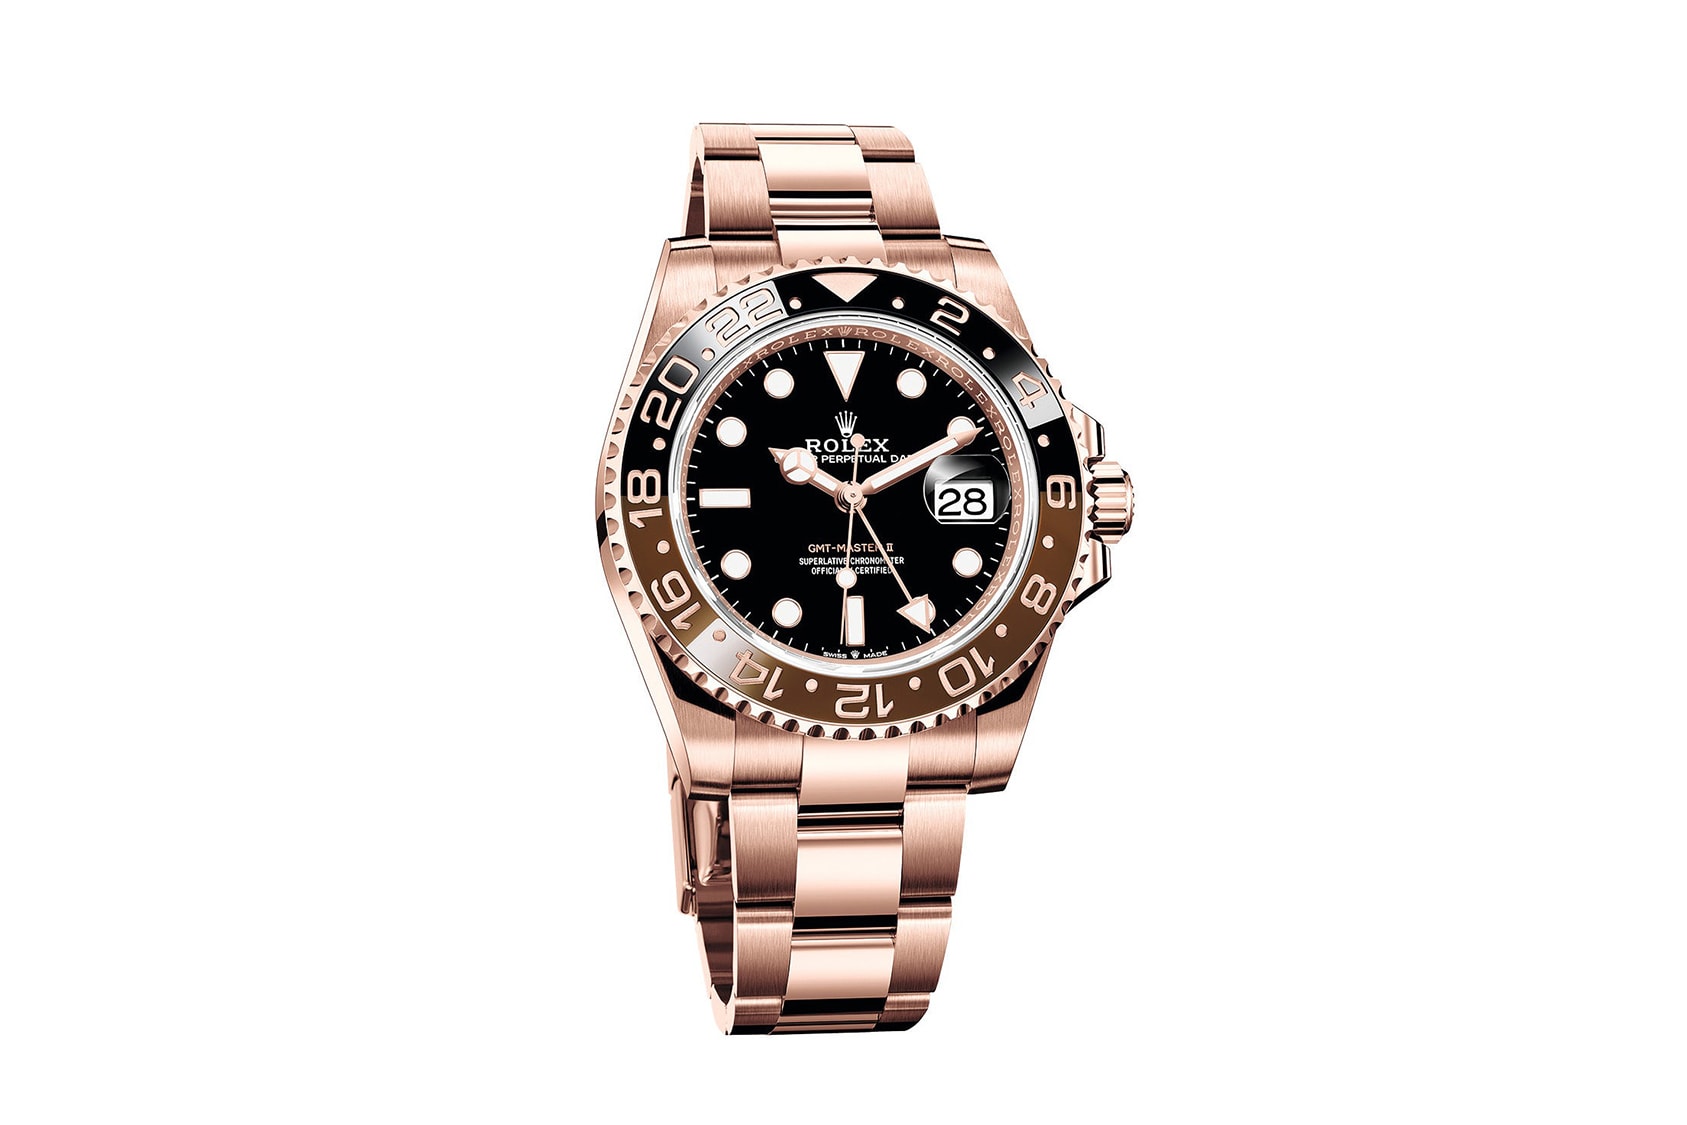 Rolex GMT Master II Everose Gold Watch Luxury Watches For Sale Pricing Availability Master 2 Rolex Batman